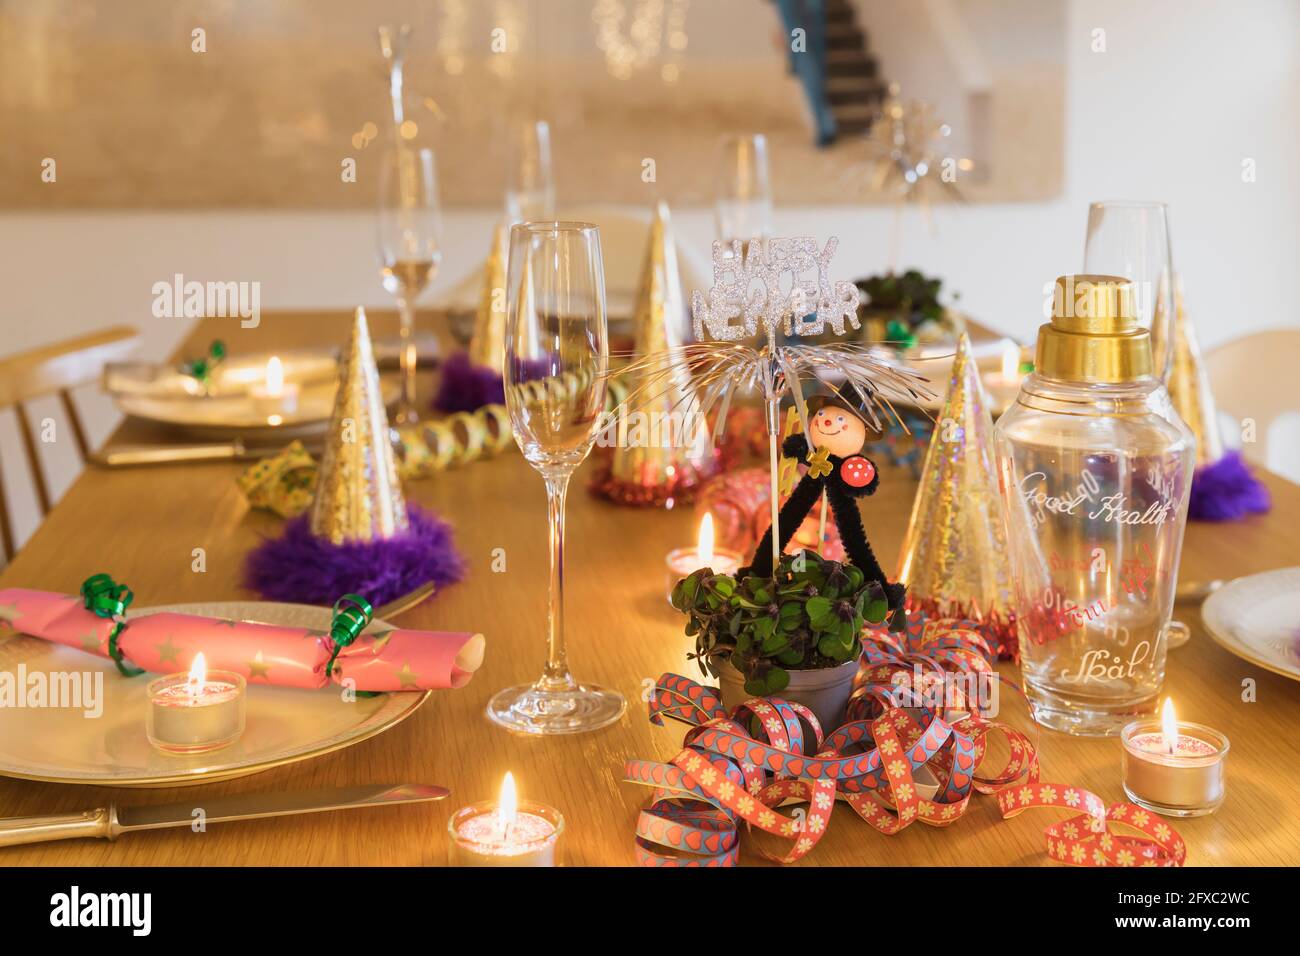 https://c8.alamy.com/comp/2FXC2WC/festive-laid-new-years-eve-table-with-plates-candles-party-hats-champagne-flutes-and-chimney-sweep-figurines-2FXC2WC.jpg